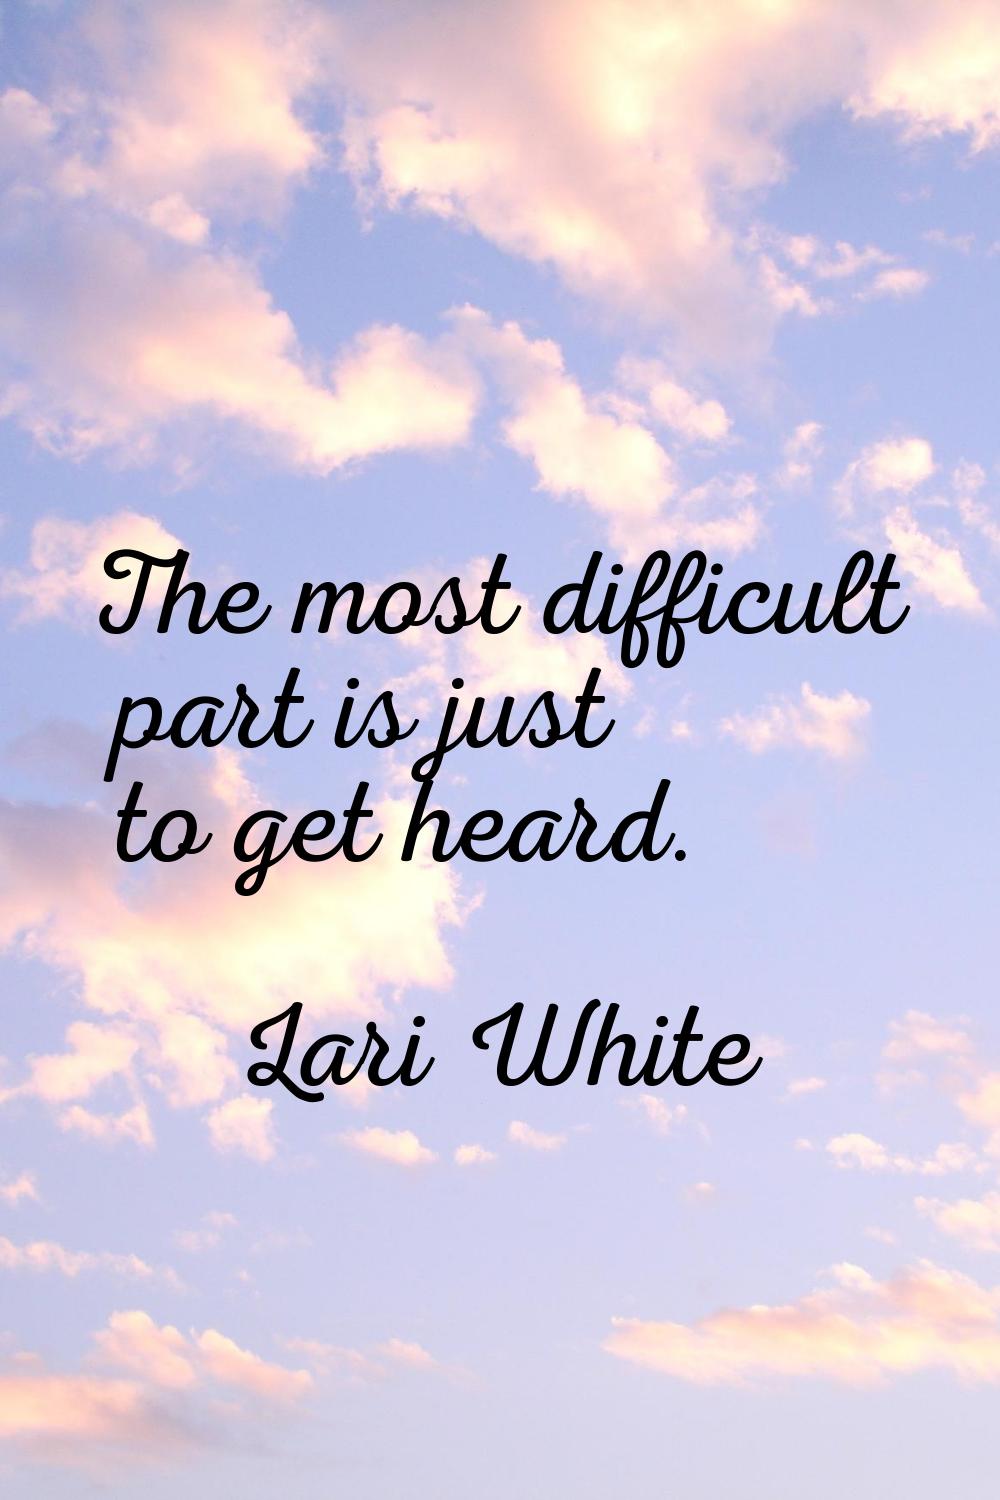 The most difficult part is just to get heard.